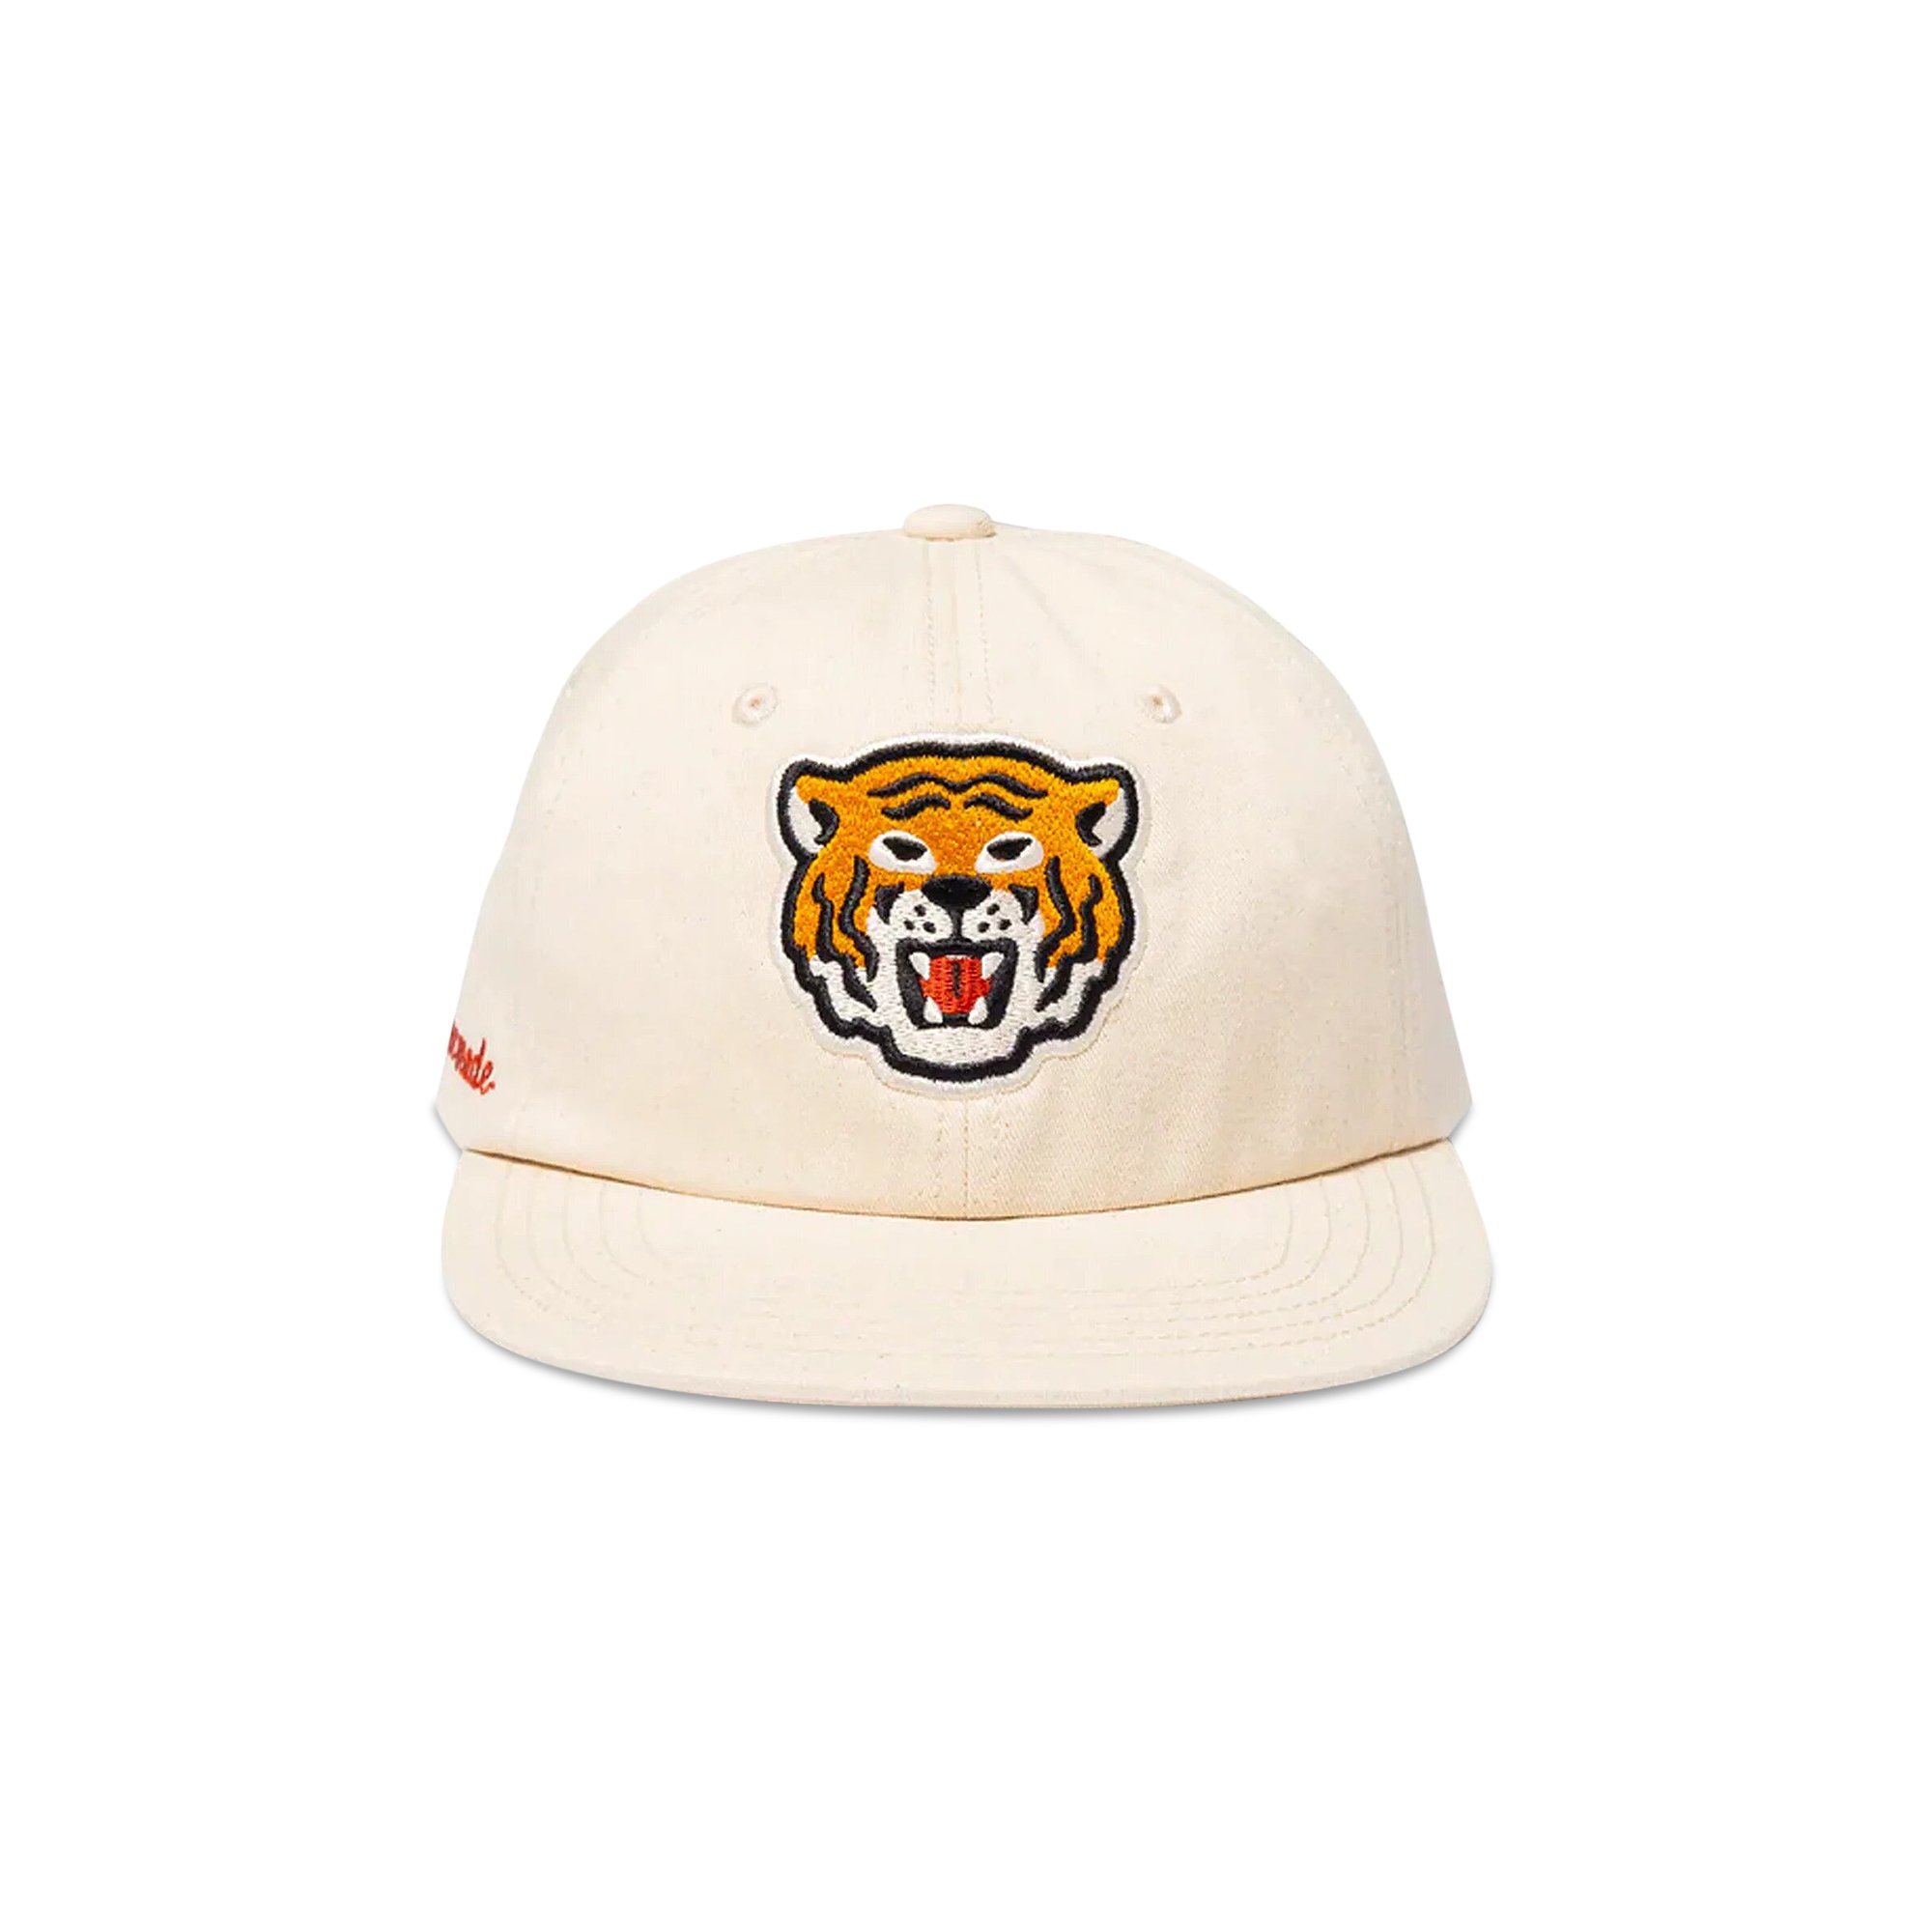 Buy Human Made 6 Panel Twill Cap #1 'WHITE' - HM25GD016 WHIT | GOAT